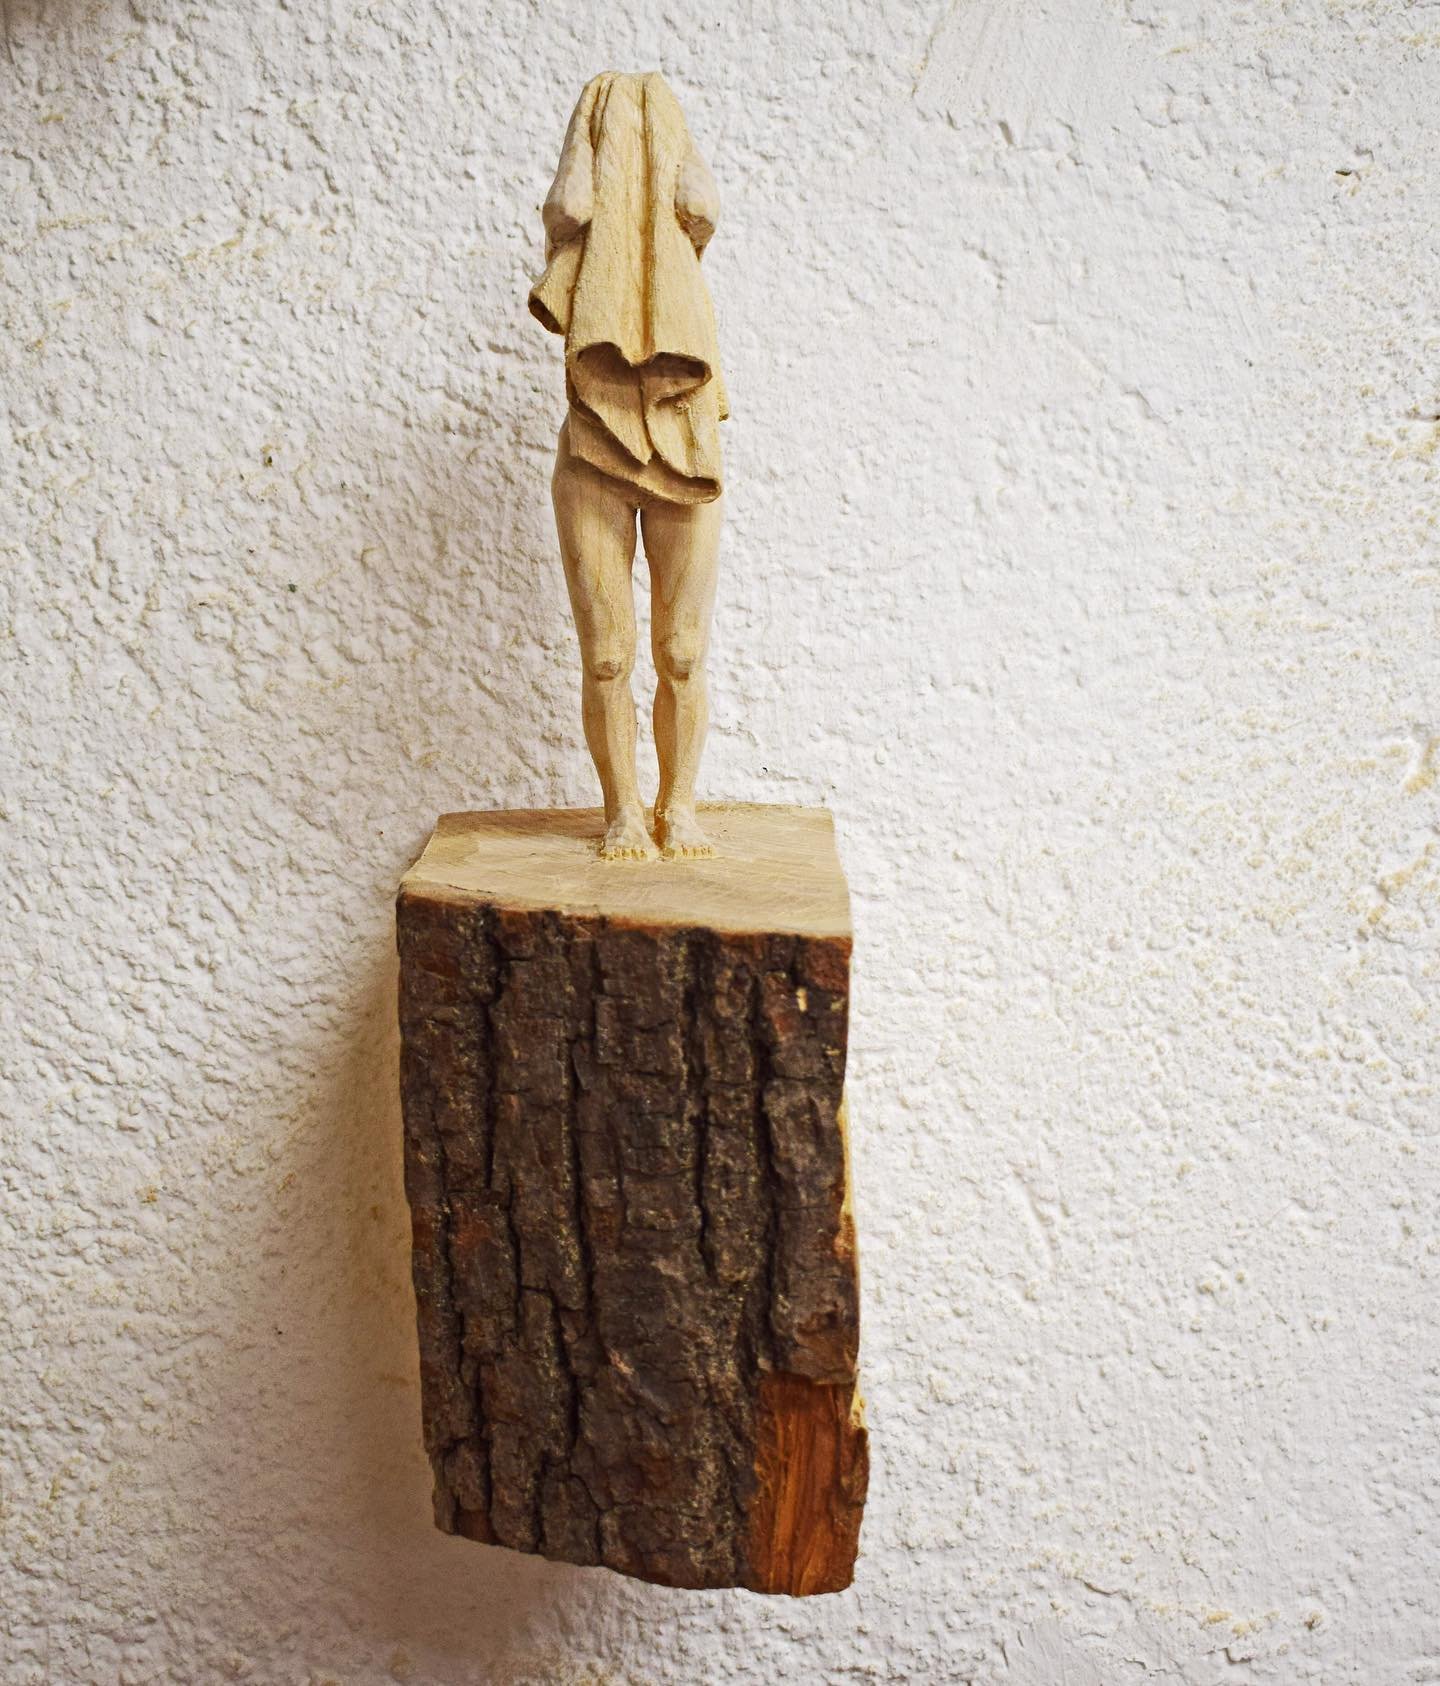 I am in awe of the pieces we received from @p.liehr 
Someone compared this piece to Wyeth. Philipp also captures a small moment perfectly. 
Shower III, carved wood, 13 inches tall. We have extended our hours for the weekend so pop in after festing!